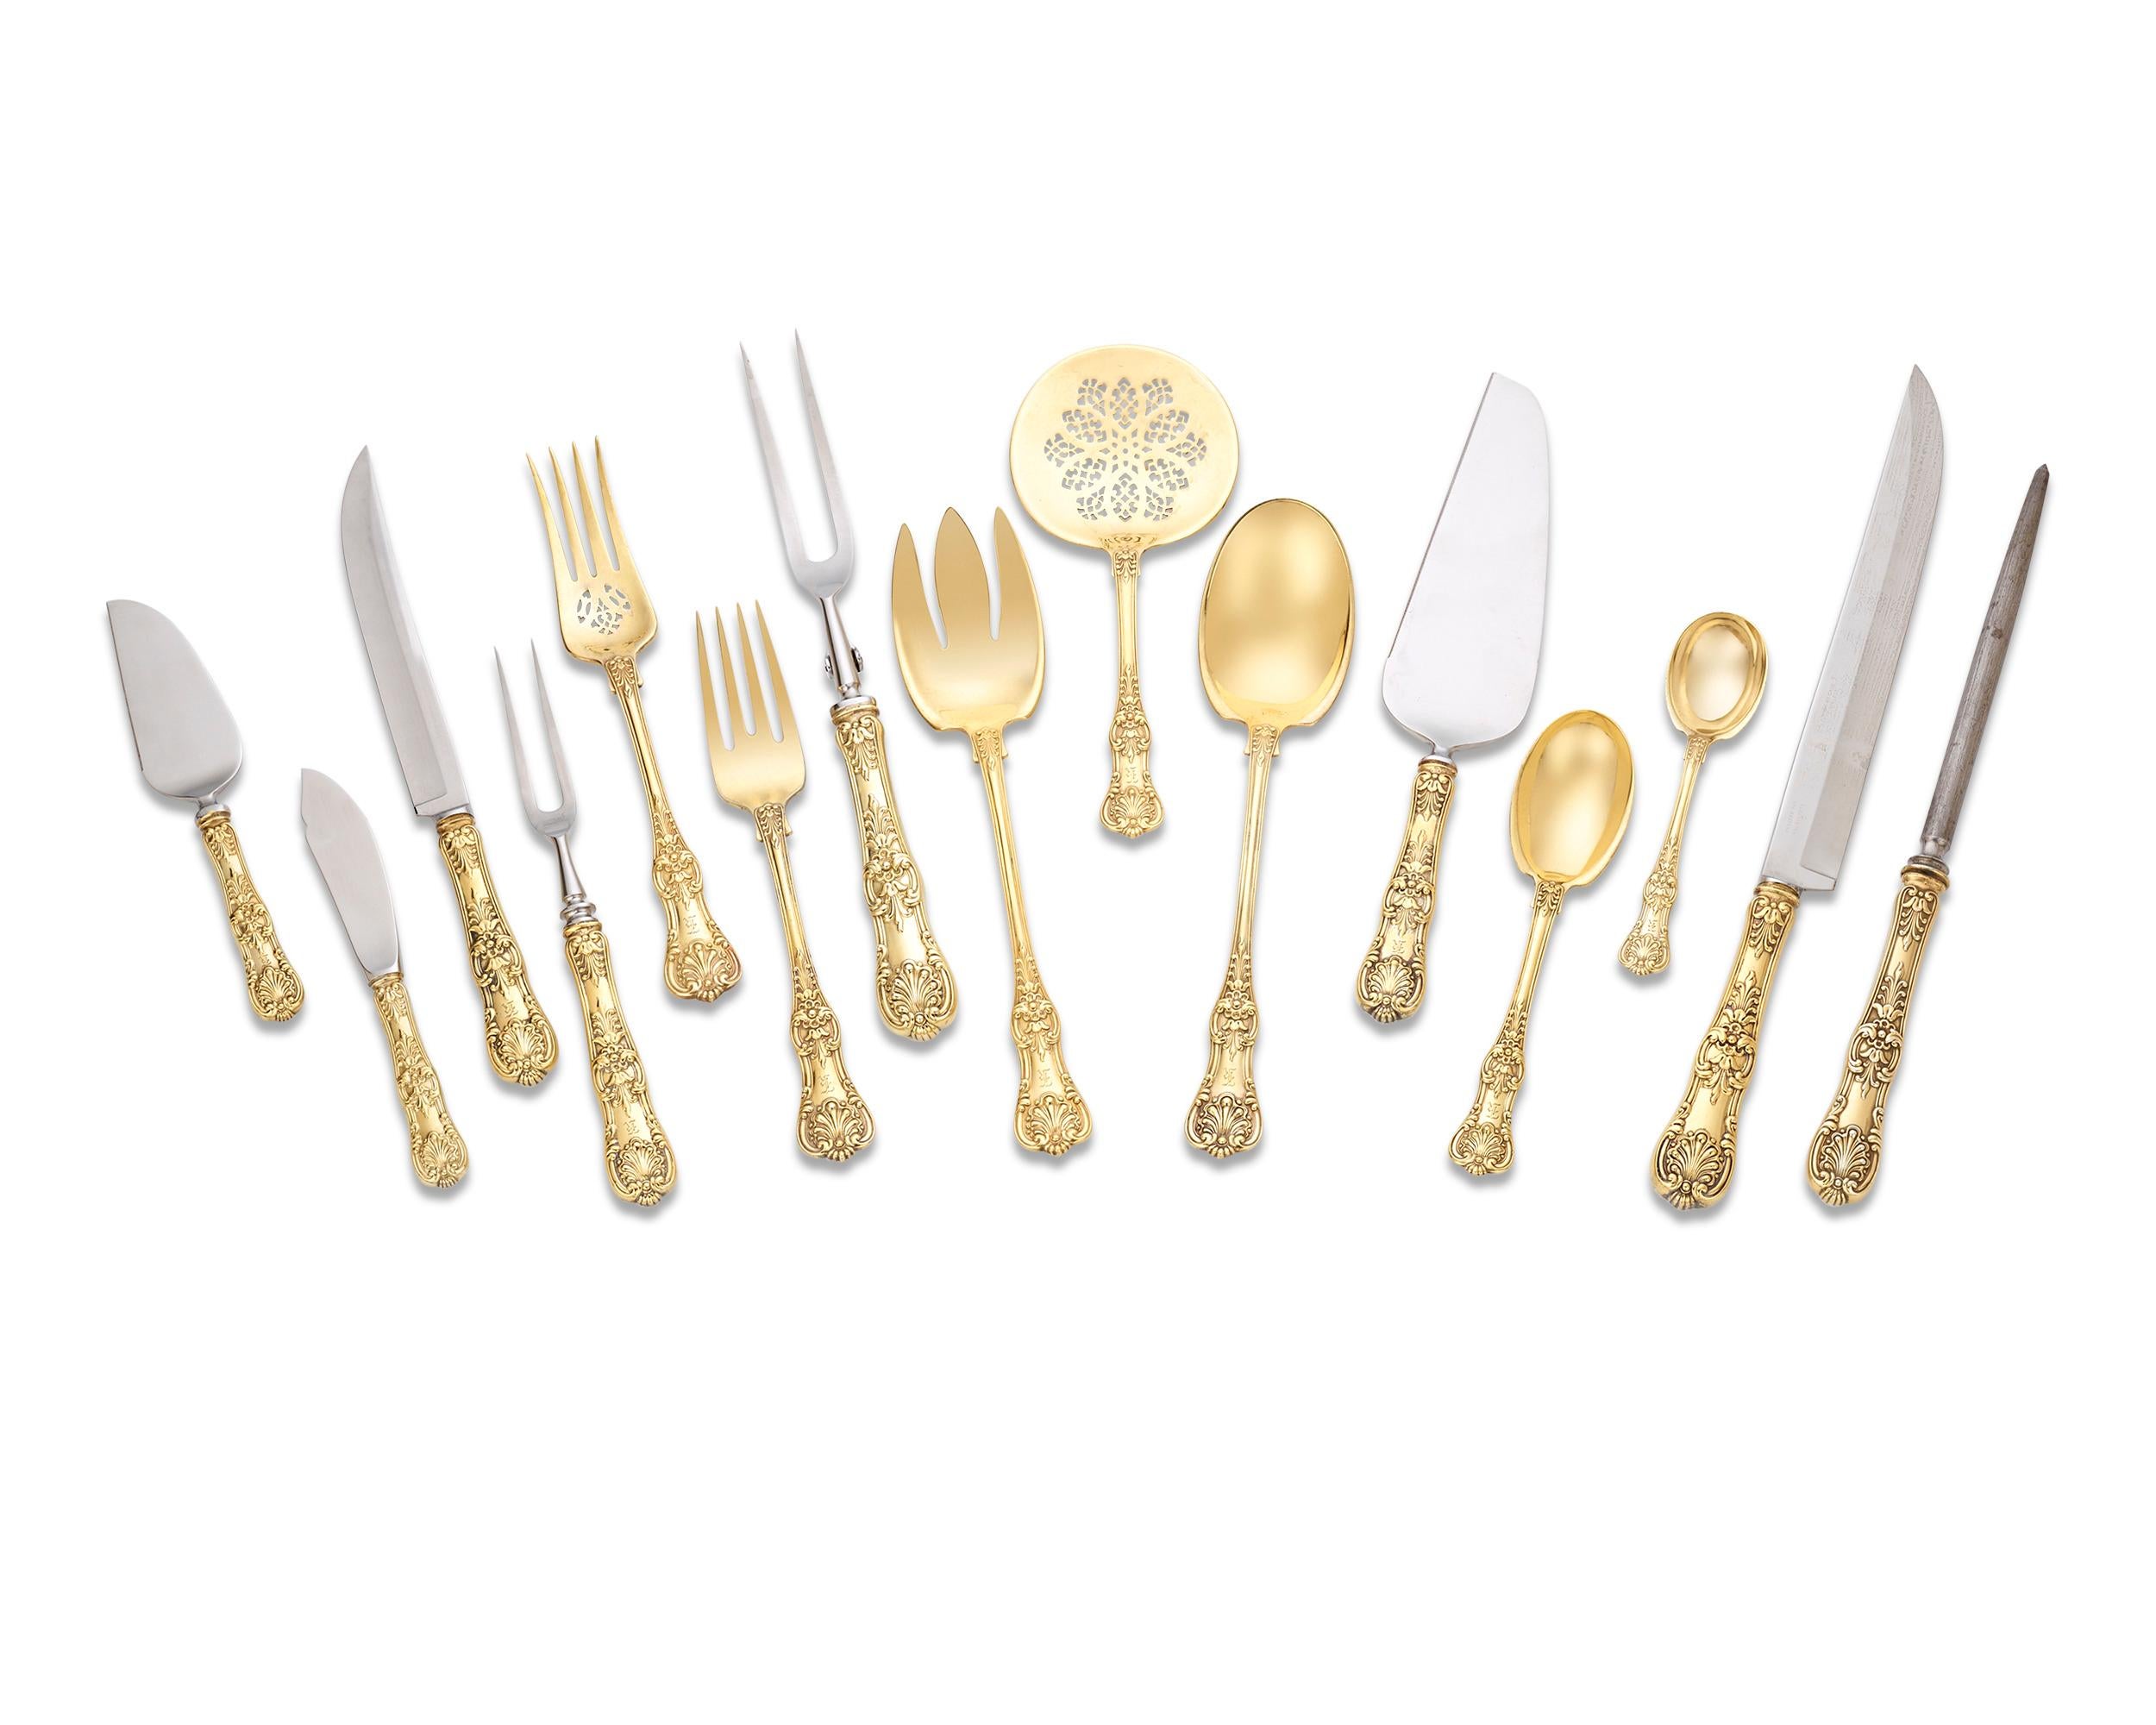 19th Century Tiffany & Co.'s English King Gilded Flatware Service, 251 Pieces